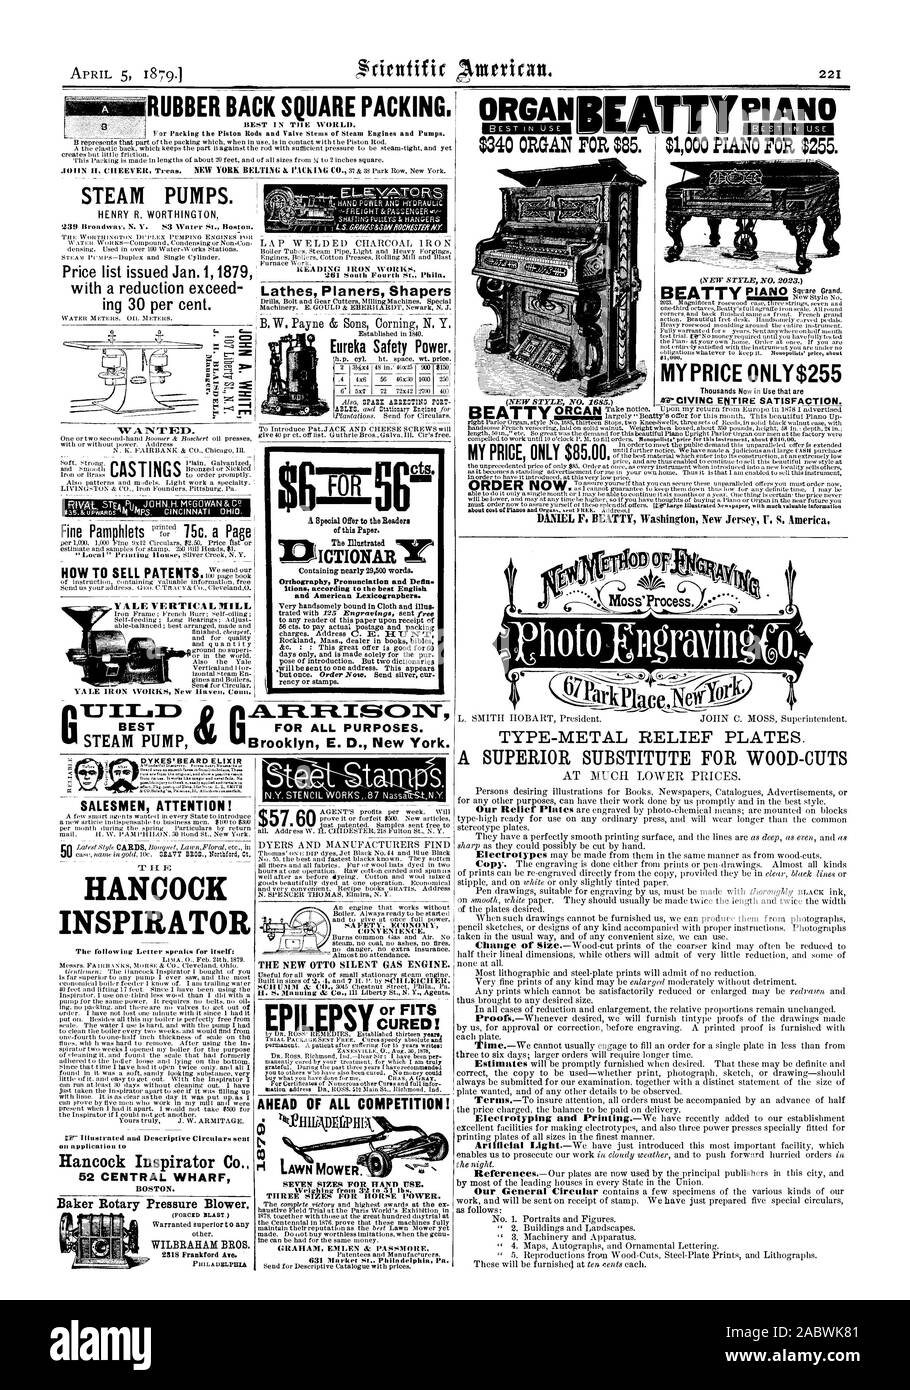 RUBBER BACK SQUARE PACKING. ORGANKATTy PIAN $340 ORGAN FOR $85. $1000 PIANO FOR $255. STEAM PUMPS. Price list issued Jan. 1 1879 with a reduction exceed ing 30 per cent. DYKES' BEARD ELIXIR SALESMEN ATTENTION! HANCOCK INSPIRATOR PIL SY CURED! AHEAD OF ALL COMPETITION! Baker Rotary Pressure Blower. BOSTON. THREE SIZES FOR HORSE POWER. SEVEN SIZES FOR HAND USE. MY PRICE ONLY$255 DANIEL F. BEATTY Washington New Jersey U. S. America TYPE-METAL RELIEF PLATES. A SUPERIOR SUBSTITUTE FOR WOOD-CUTS VALE VERTICAL MILL A READING 261 IRON WORKS Lathes Planers Shapers Eureka Safety Power. itions according Stock Photo